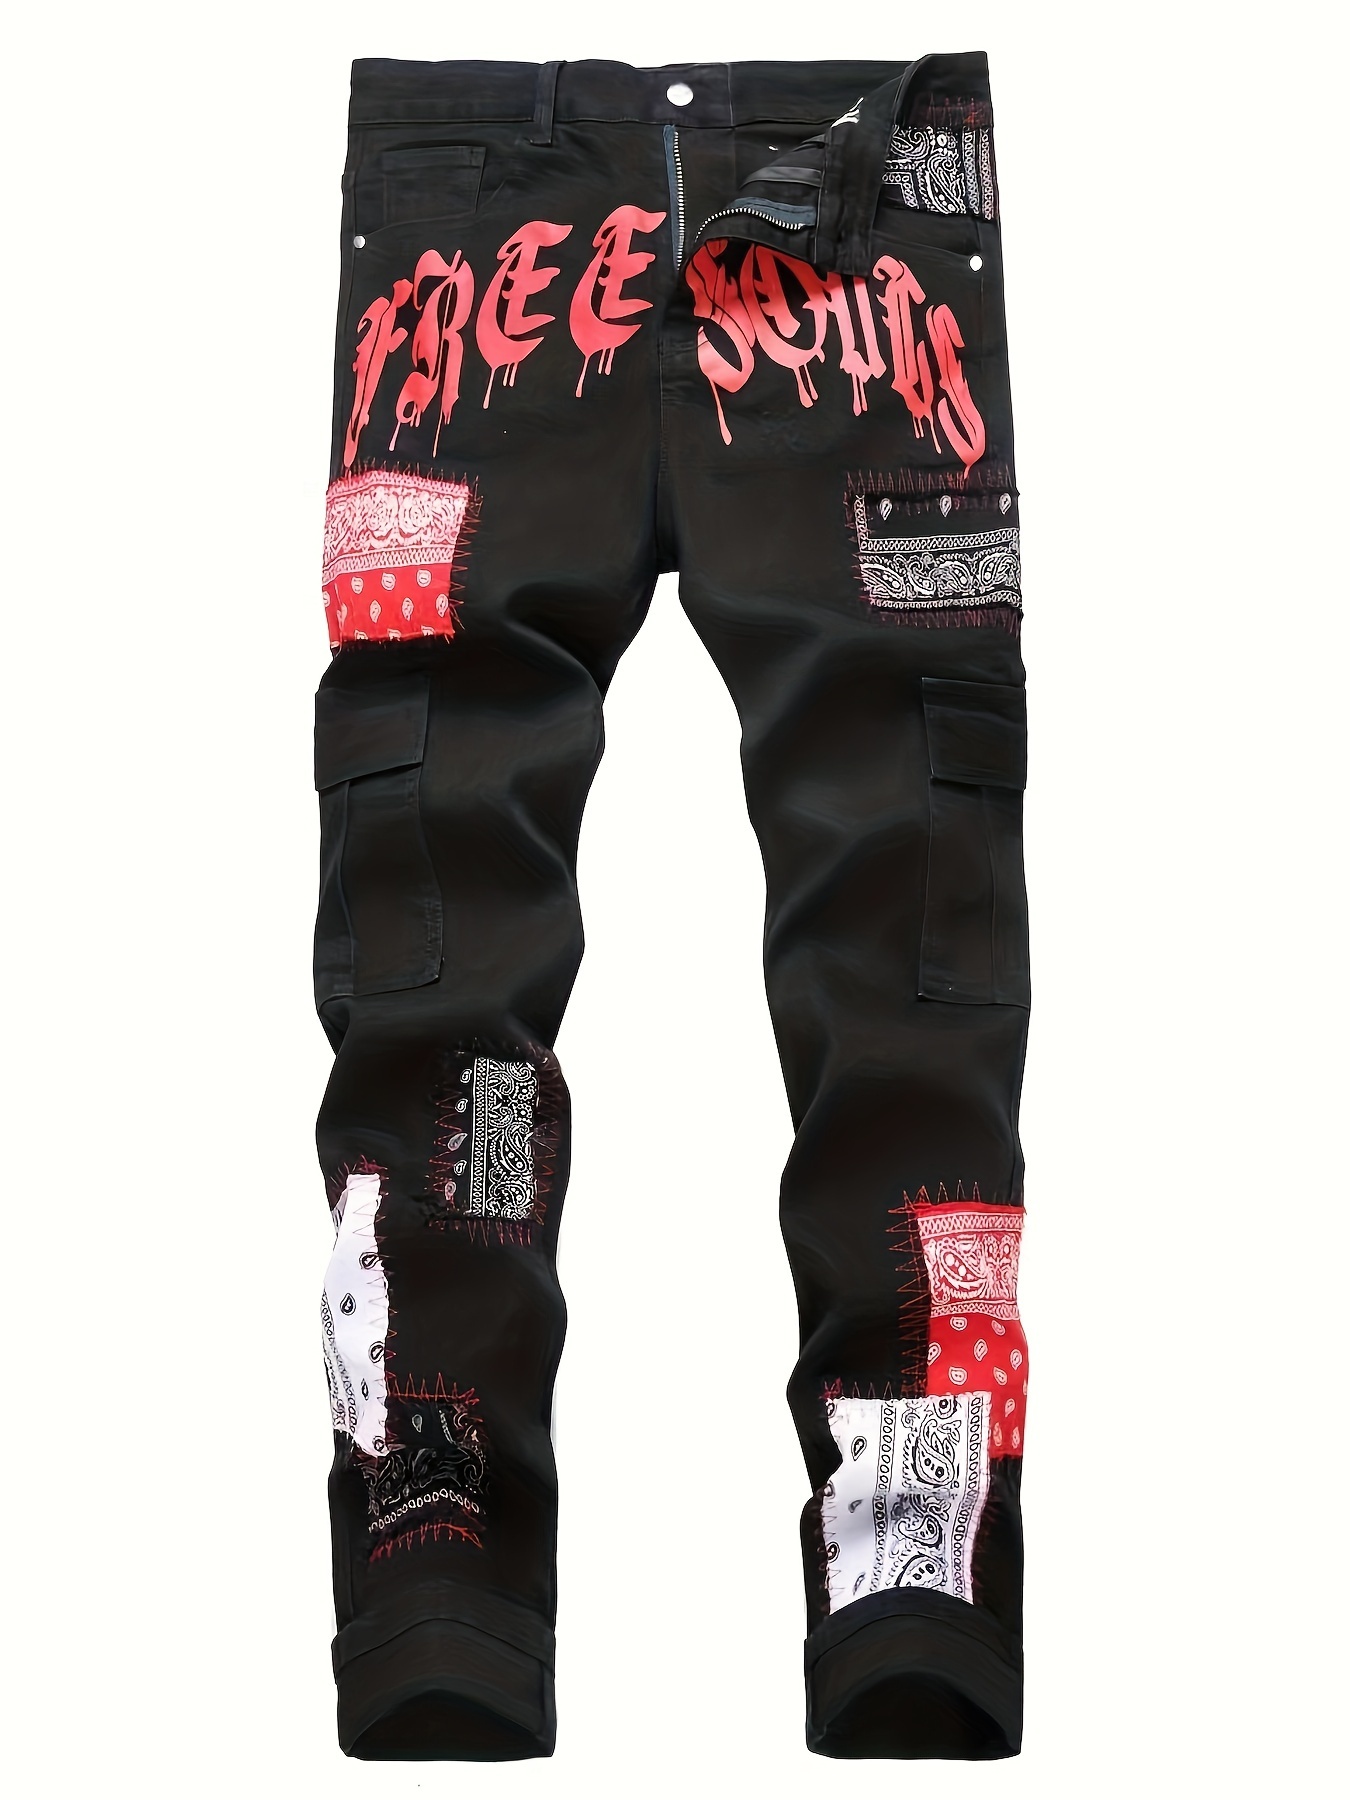 Men's Red Jeans Skinny Fit Ripped Destroyed Distressed Stylish Denim Jeans